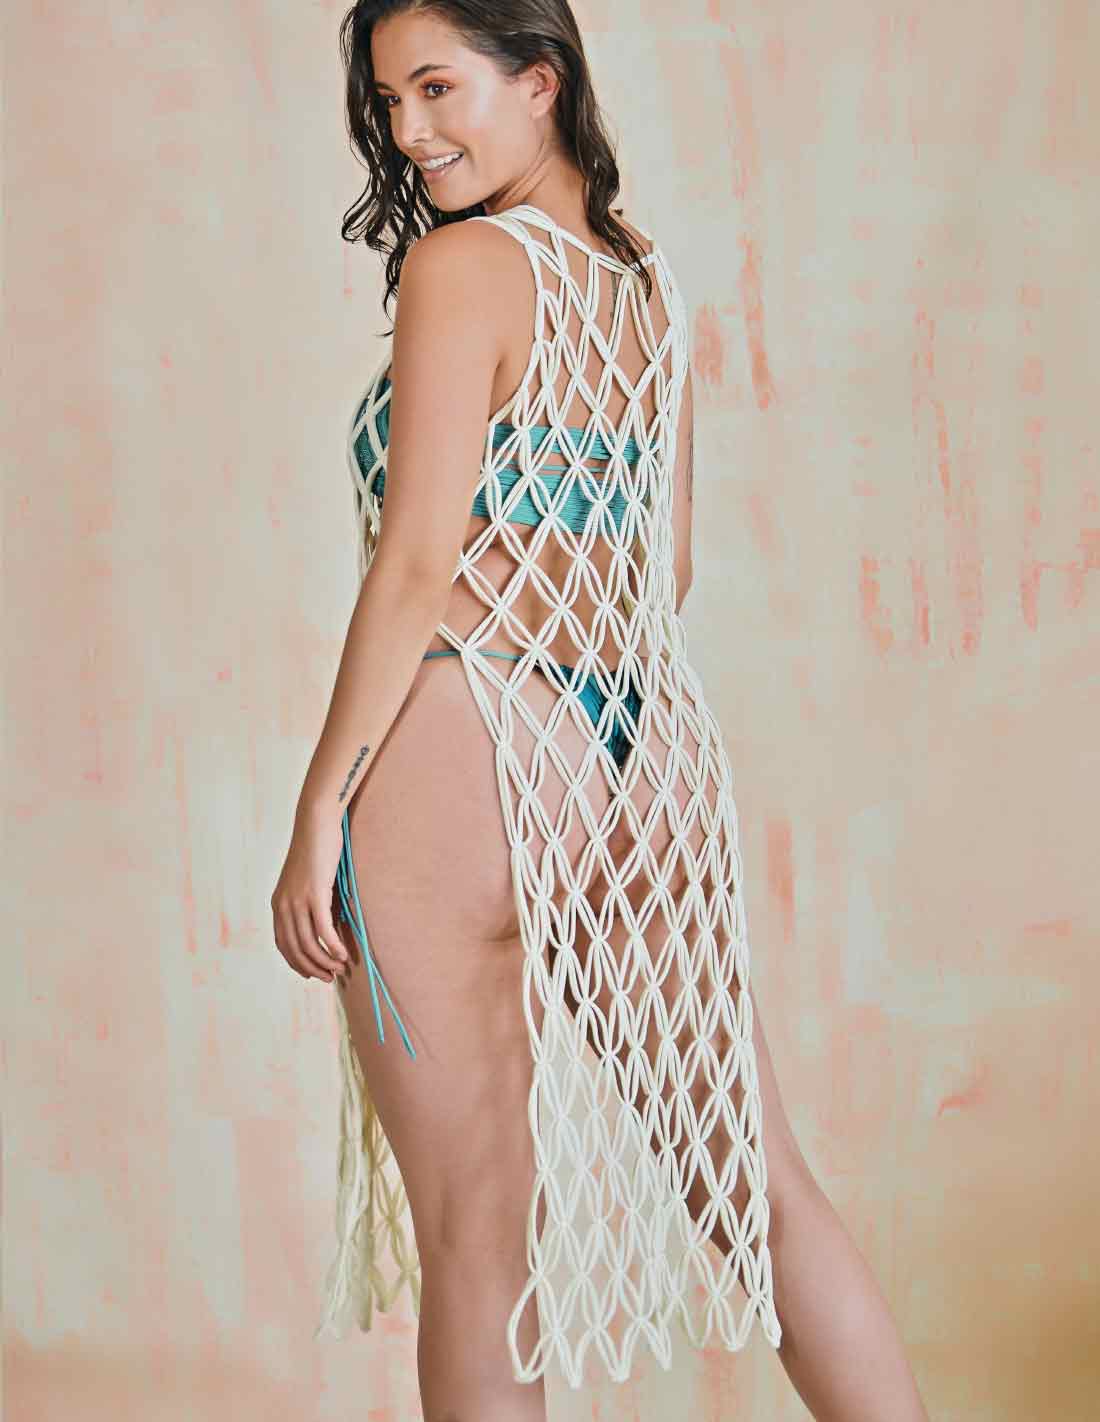 Geyser Dress Ivory. Dress With Hand Woven Macramé In Ivory. Entreaguas